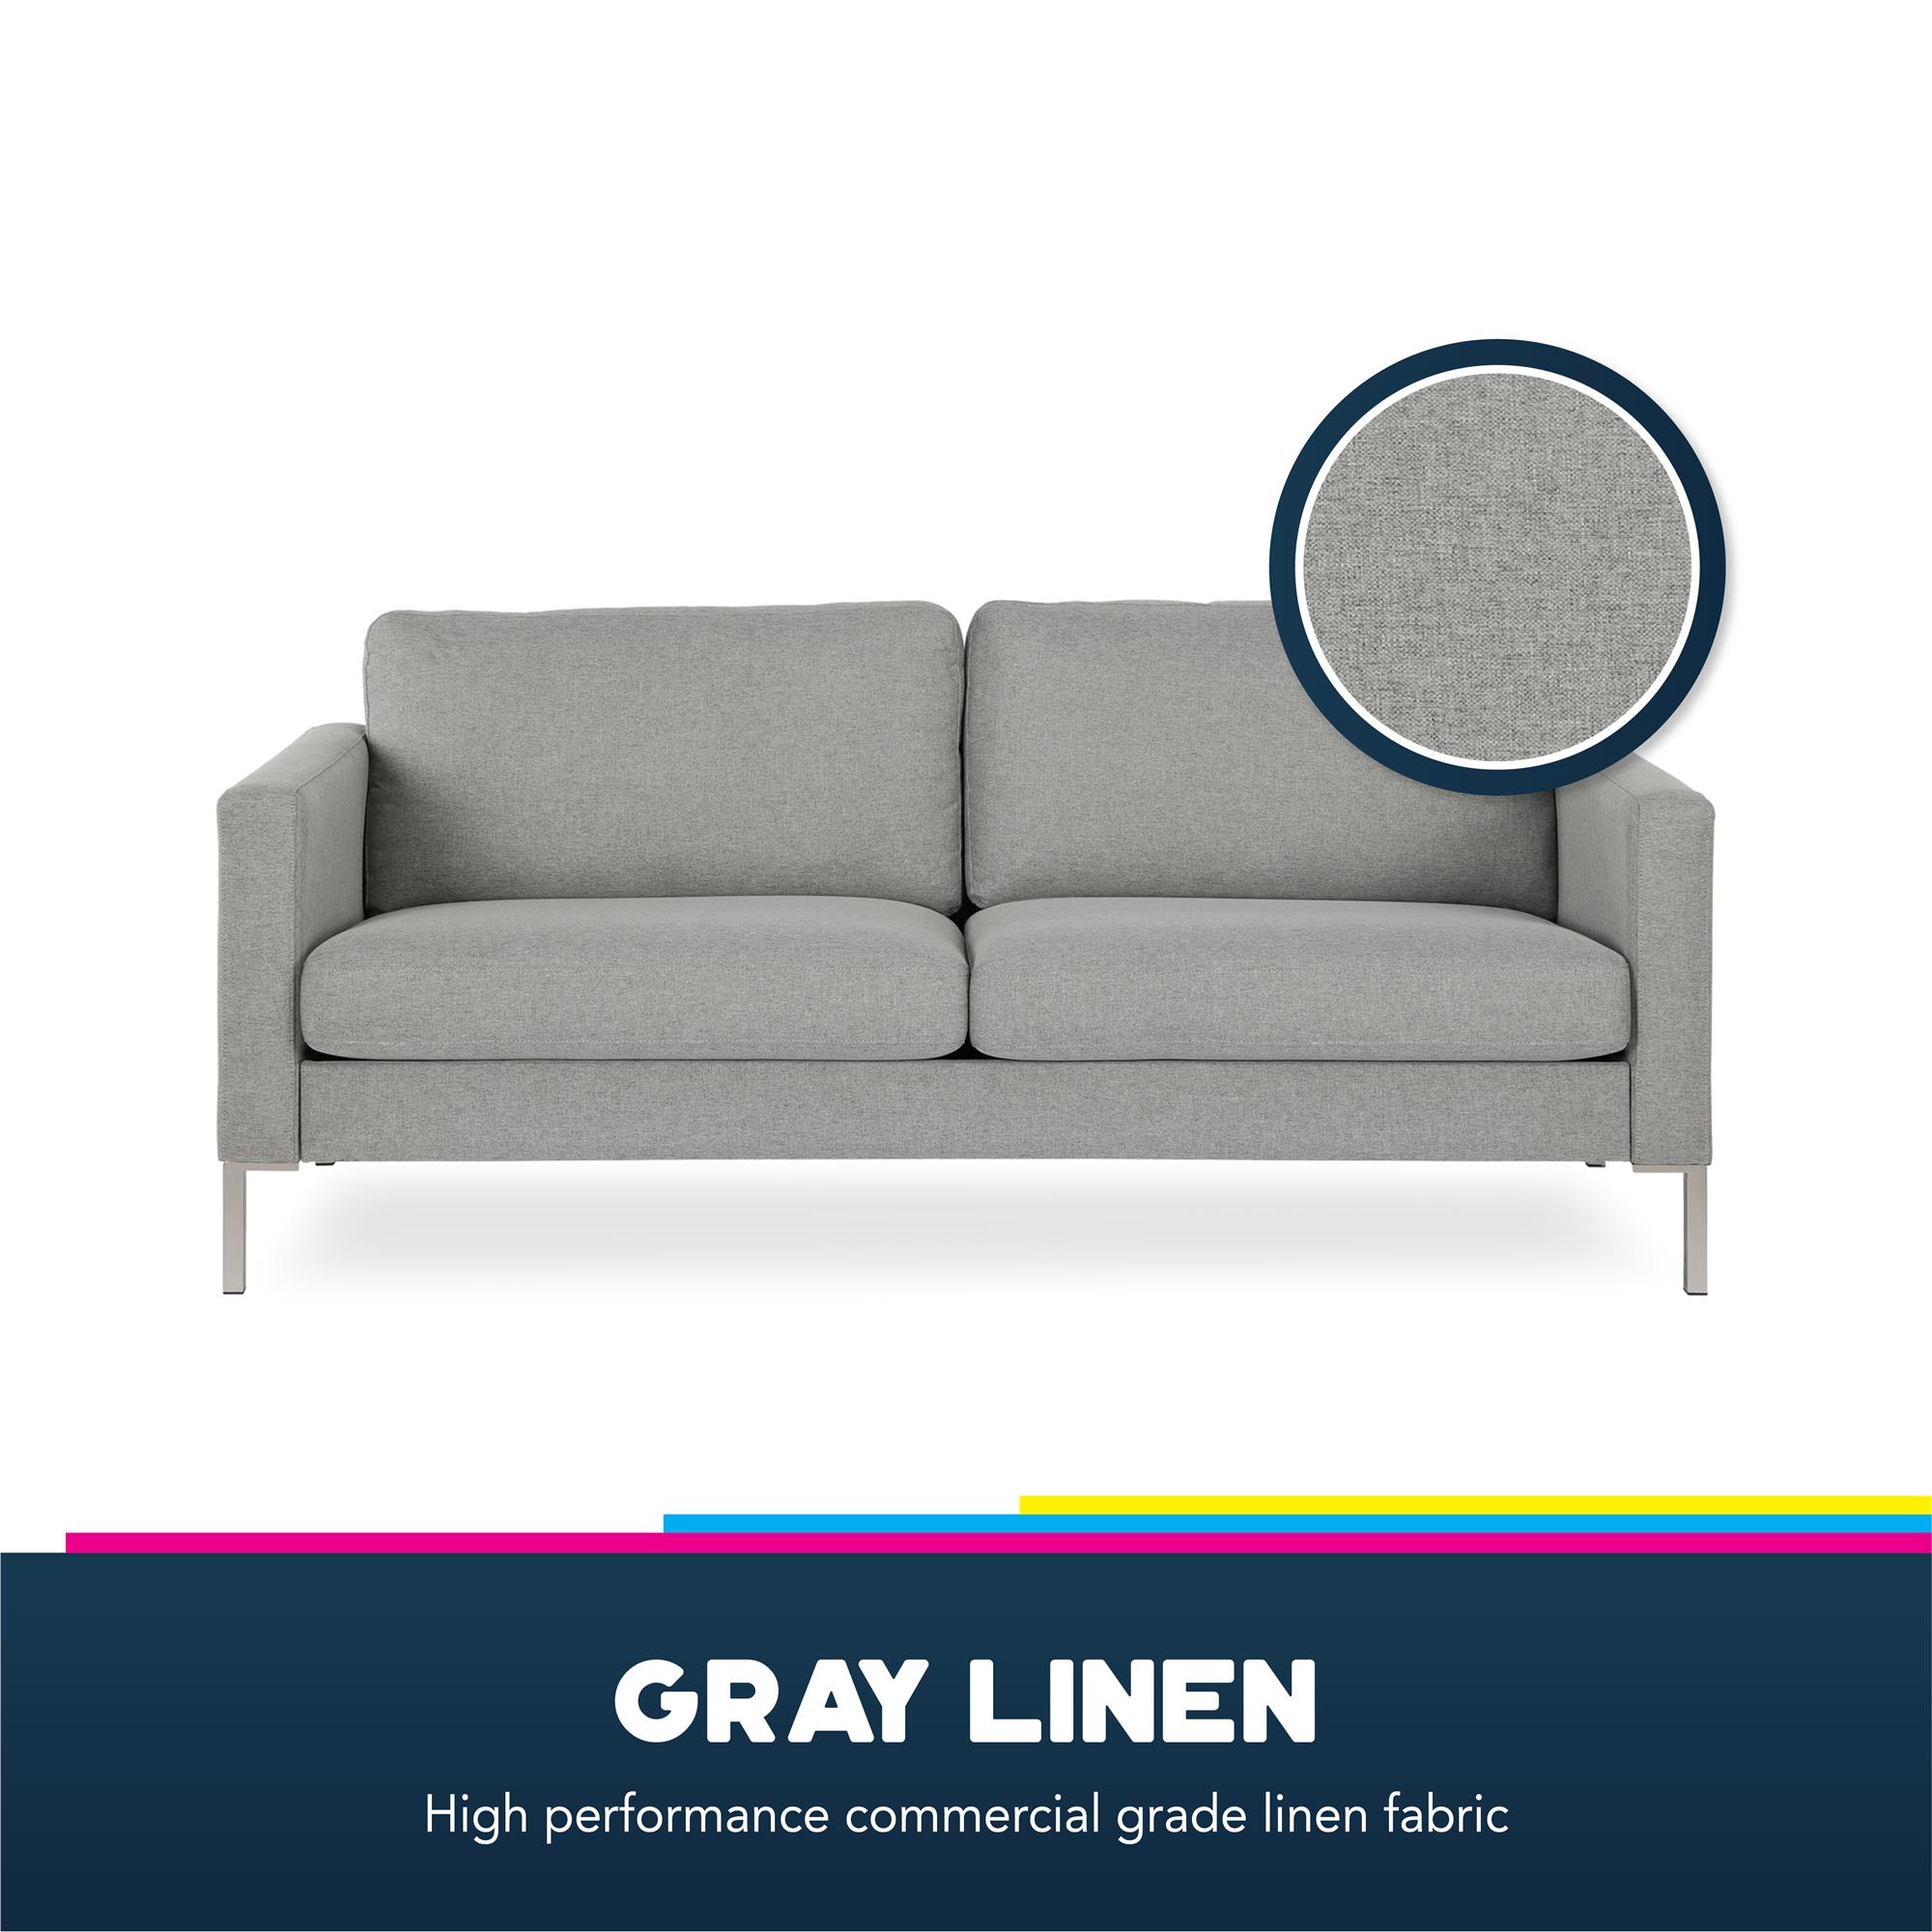 DHP Lexington Modern Sofa & Couch, Living Room Furniture, Gray Linen - image 7 of 15